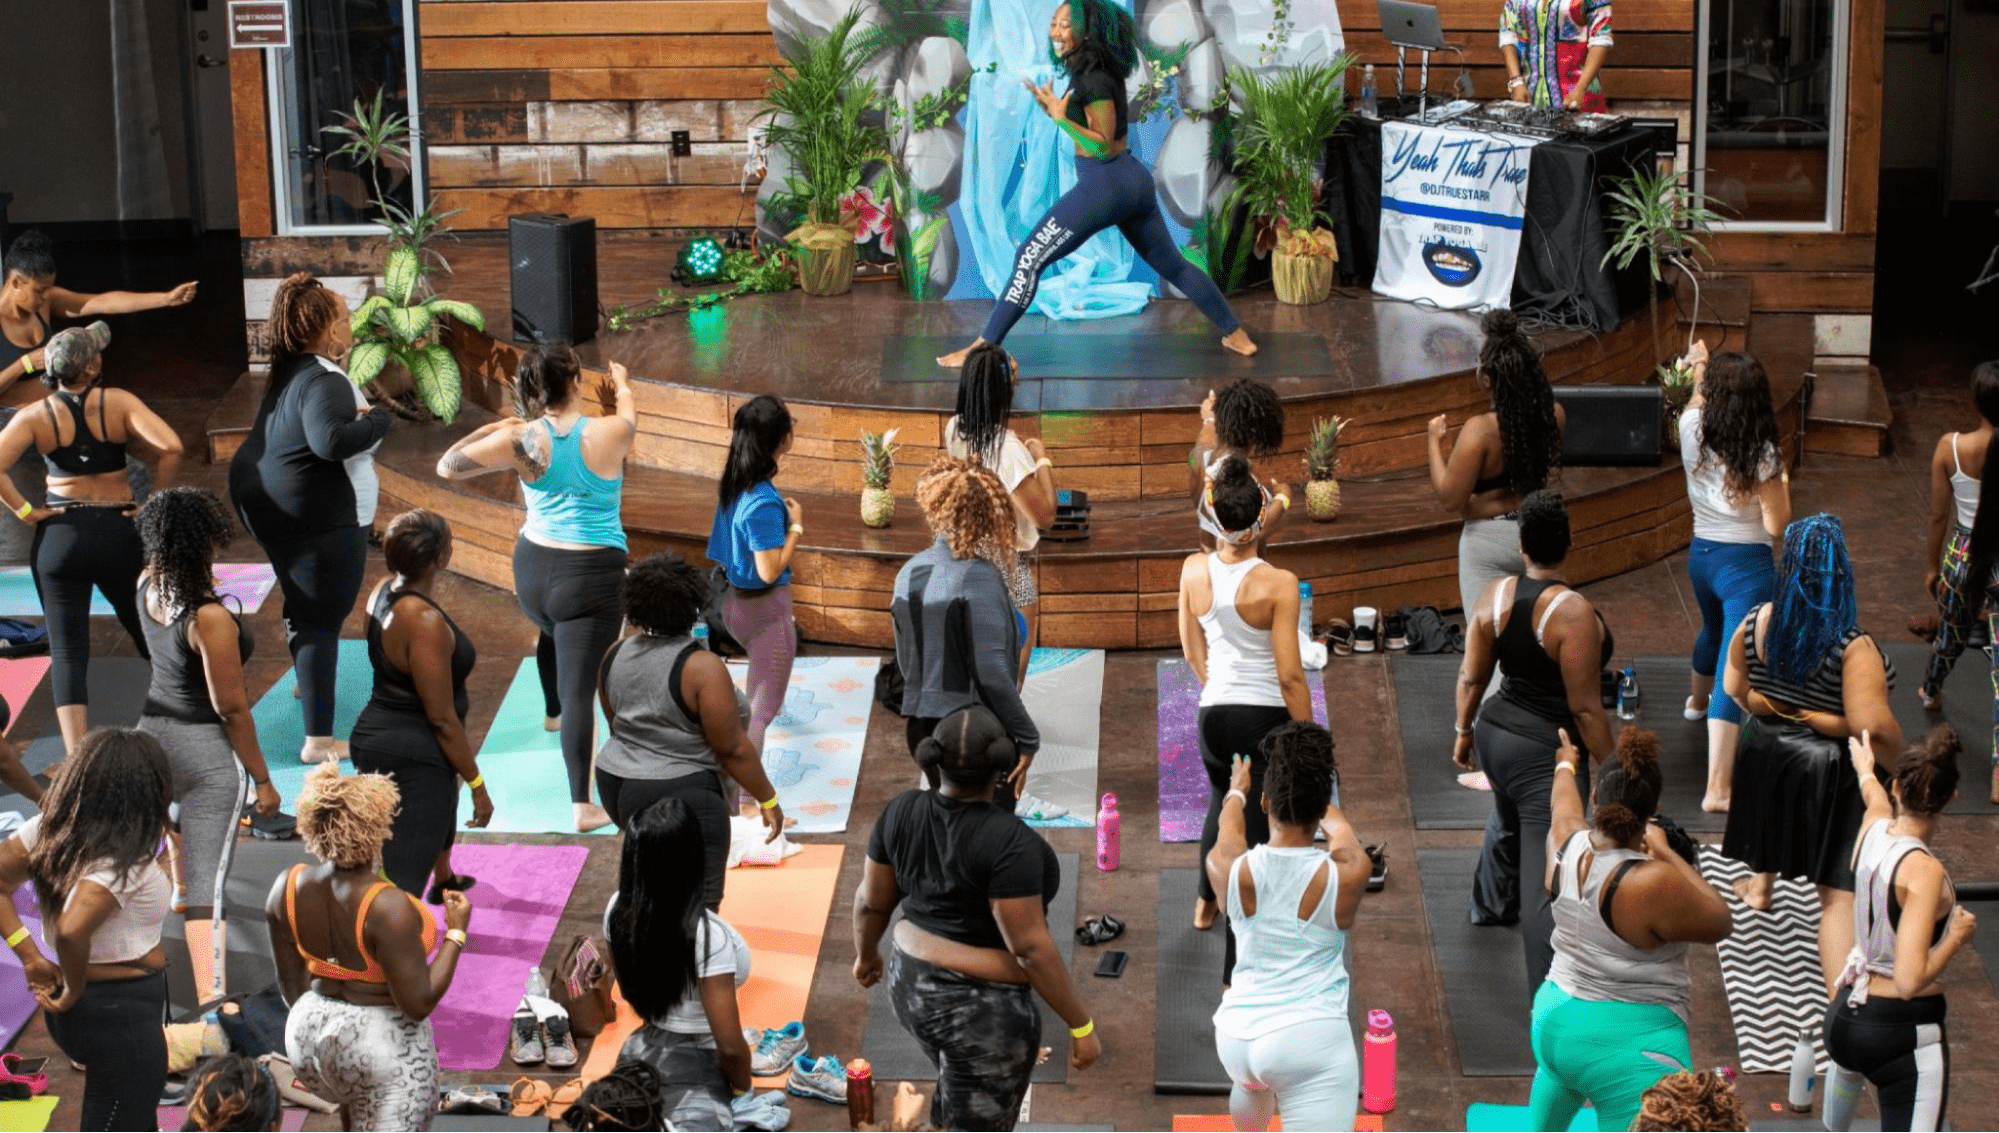 Yoga instructor on stage teaching a class